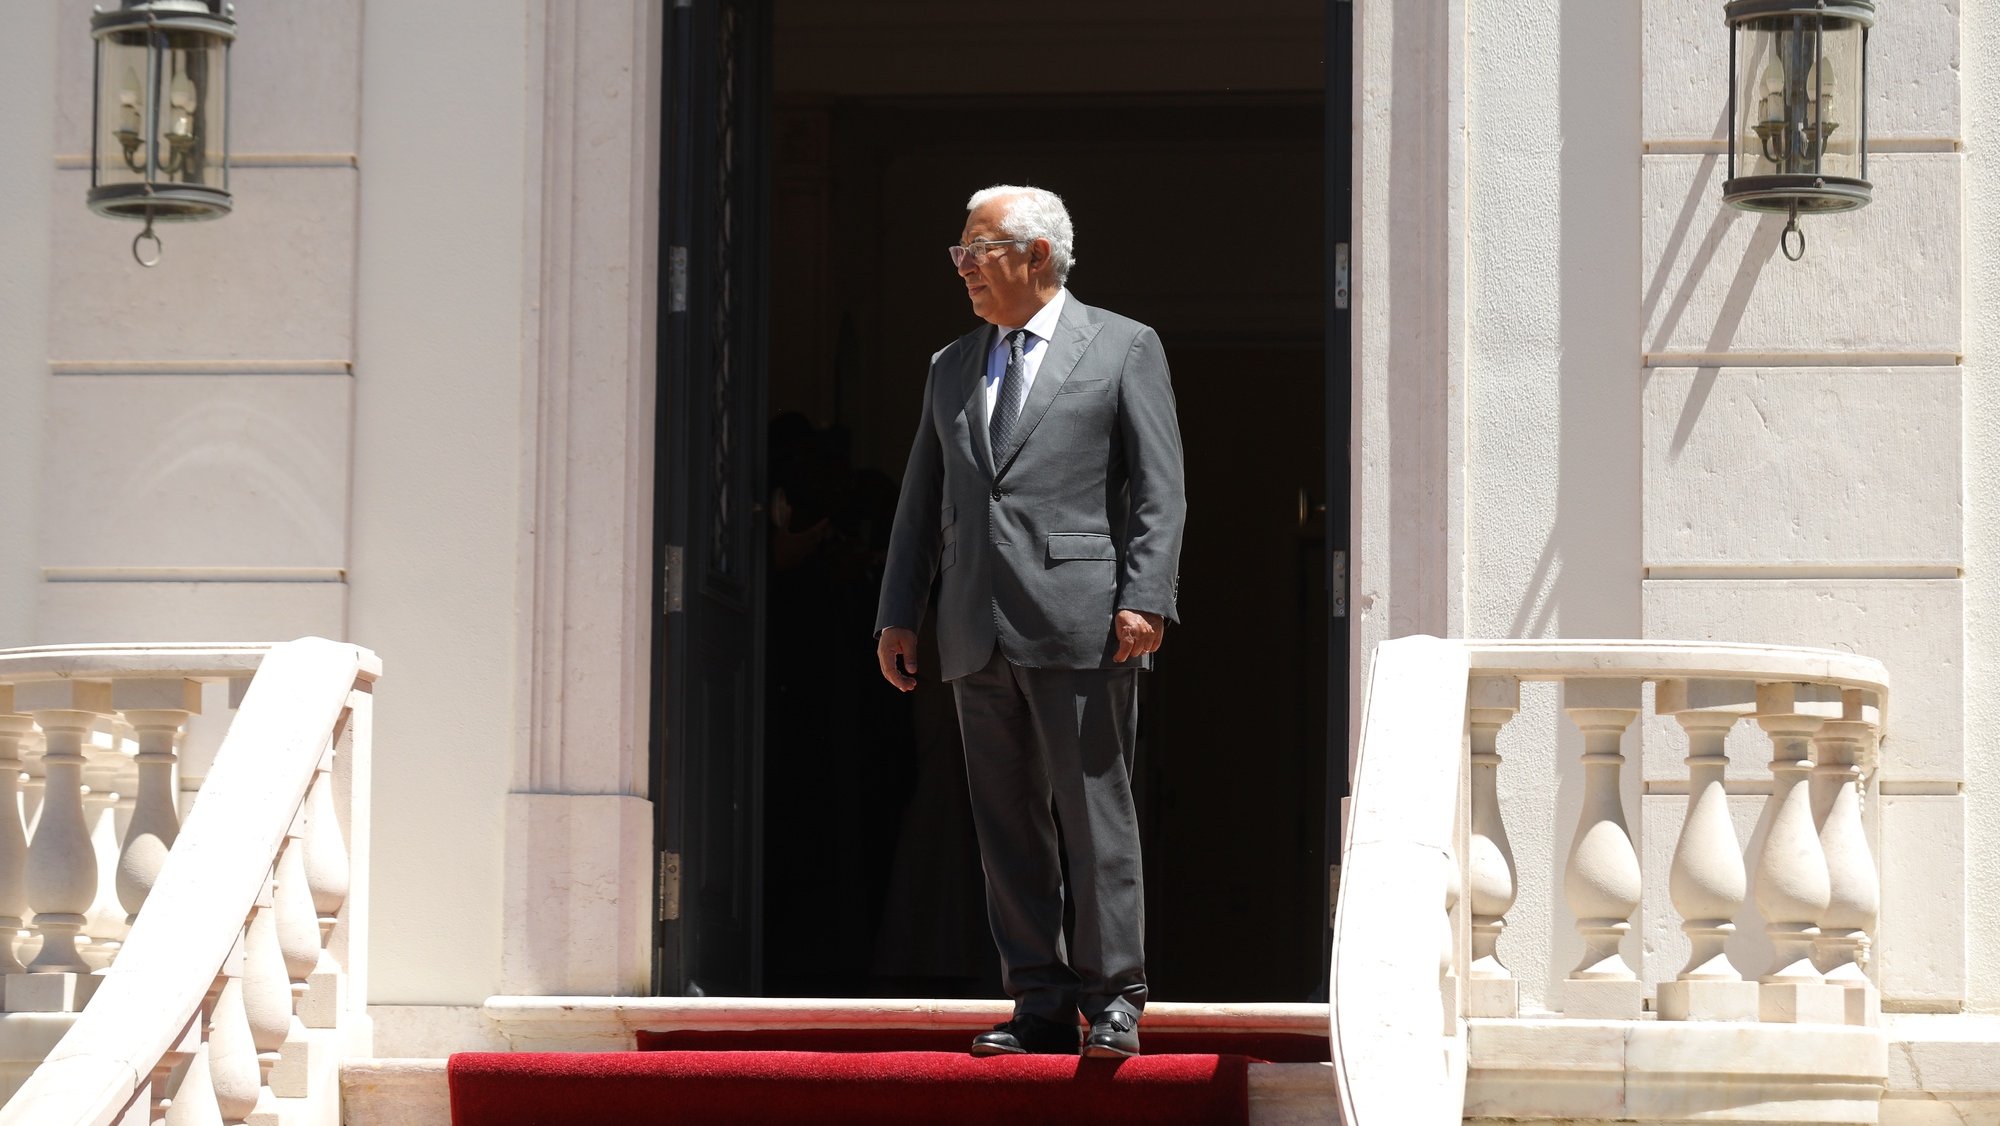 Portugal&#039;s Prime Minister Antonio Costa (R) waits for Nigeria&#039;s President Muhammadu Buhari (not seen) before a meeting at Sao Bento Palace in Lisbon, Portugal, 01 July 2022. MIGUEL A. LOPES/LUSA